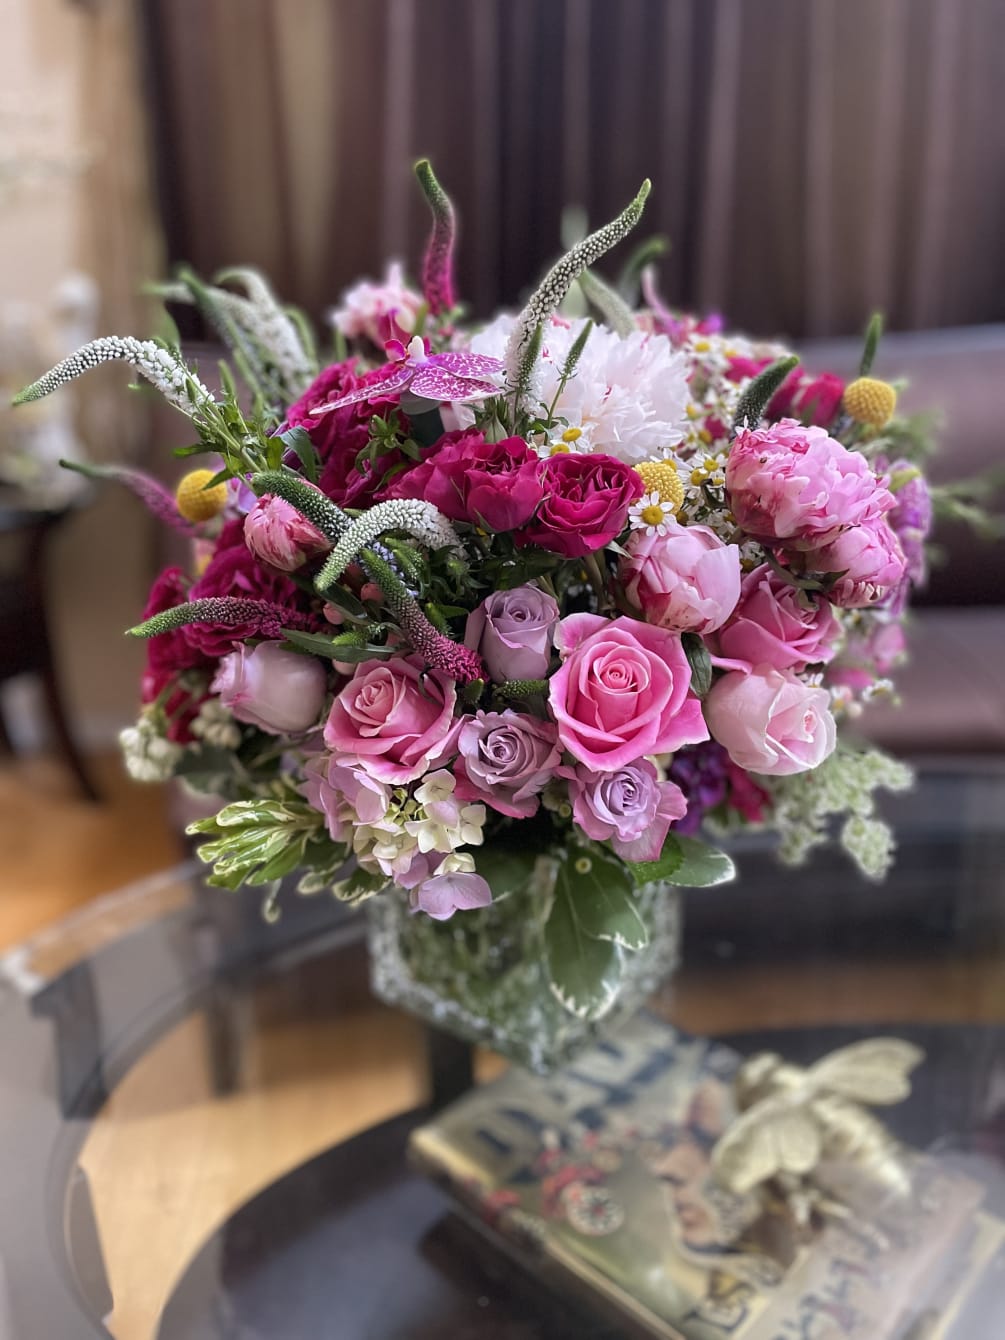 This exquisite floral arrangement combines the delicate beauty of pink roses with